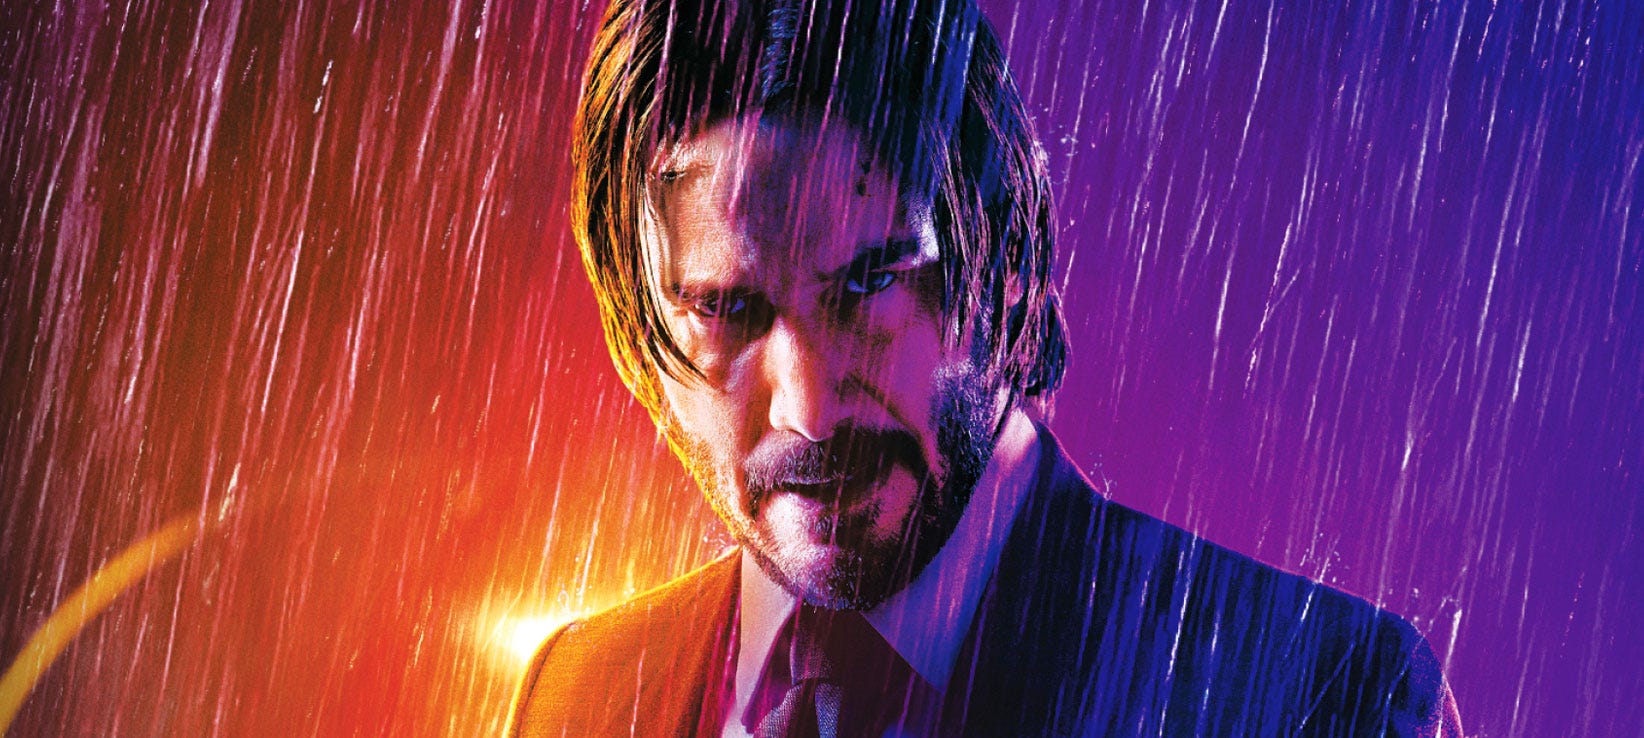 19 Movies Like John Wick to Watch for More Stylish Action